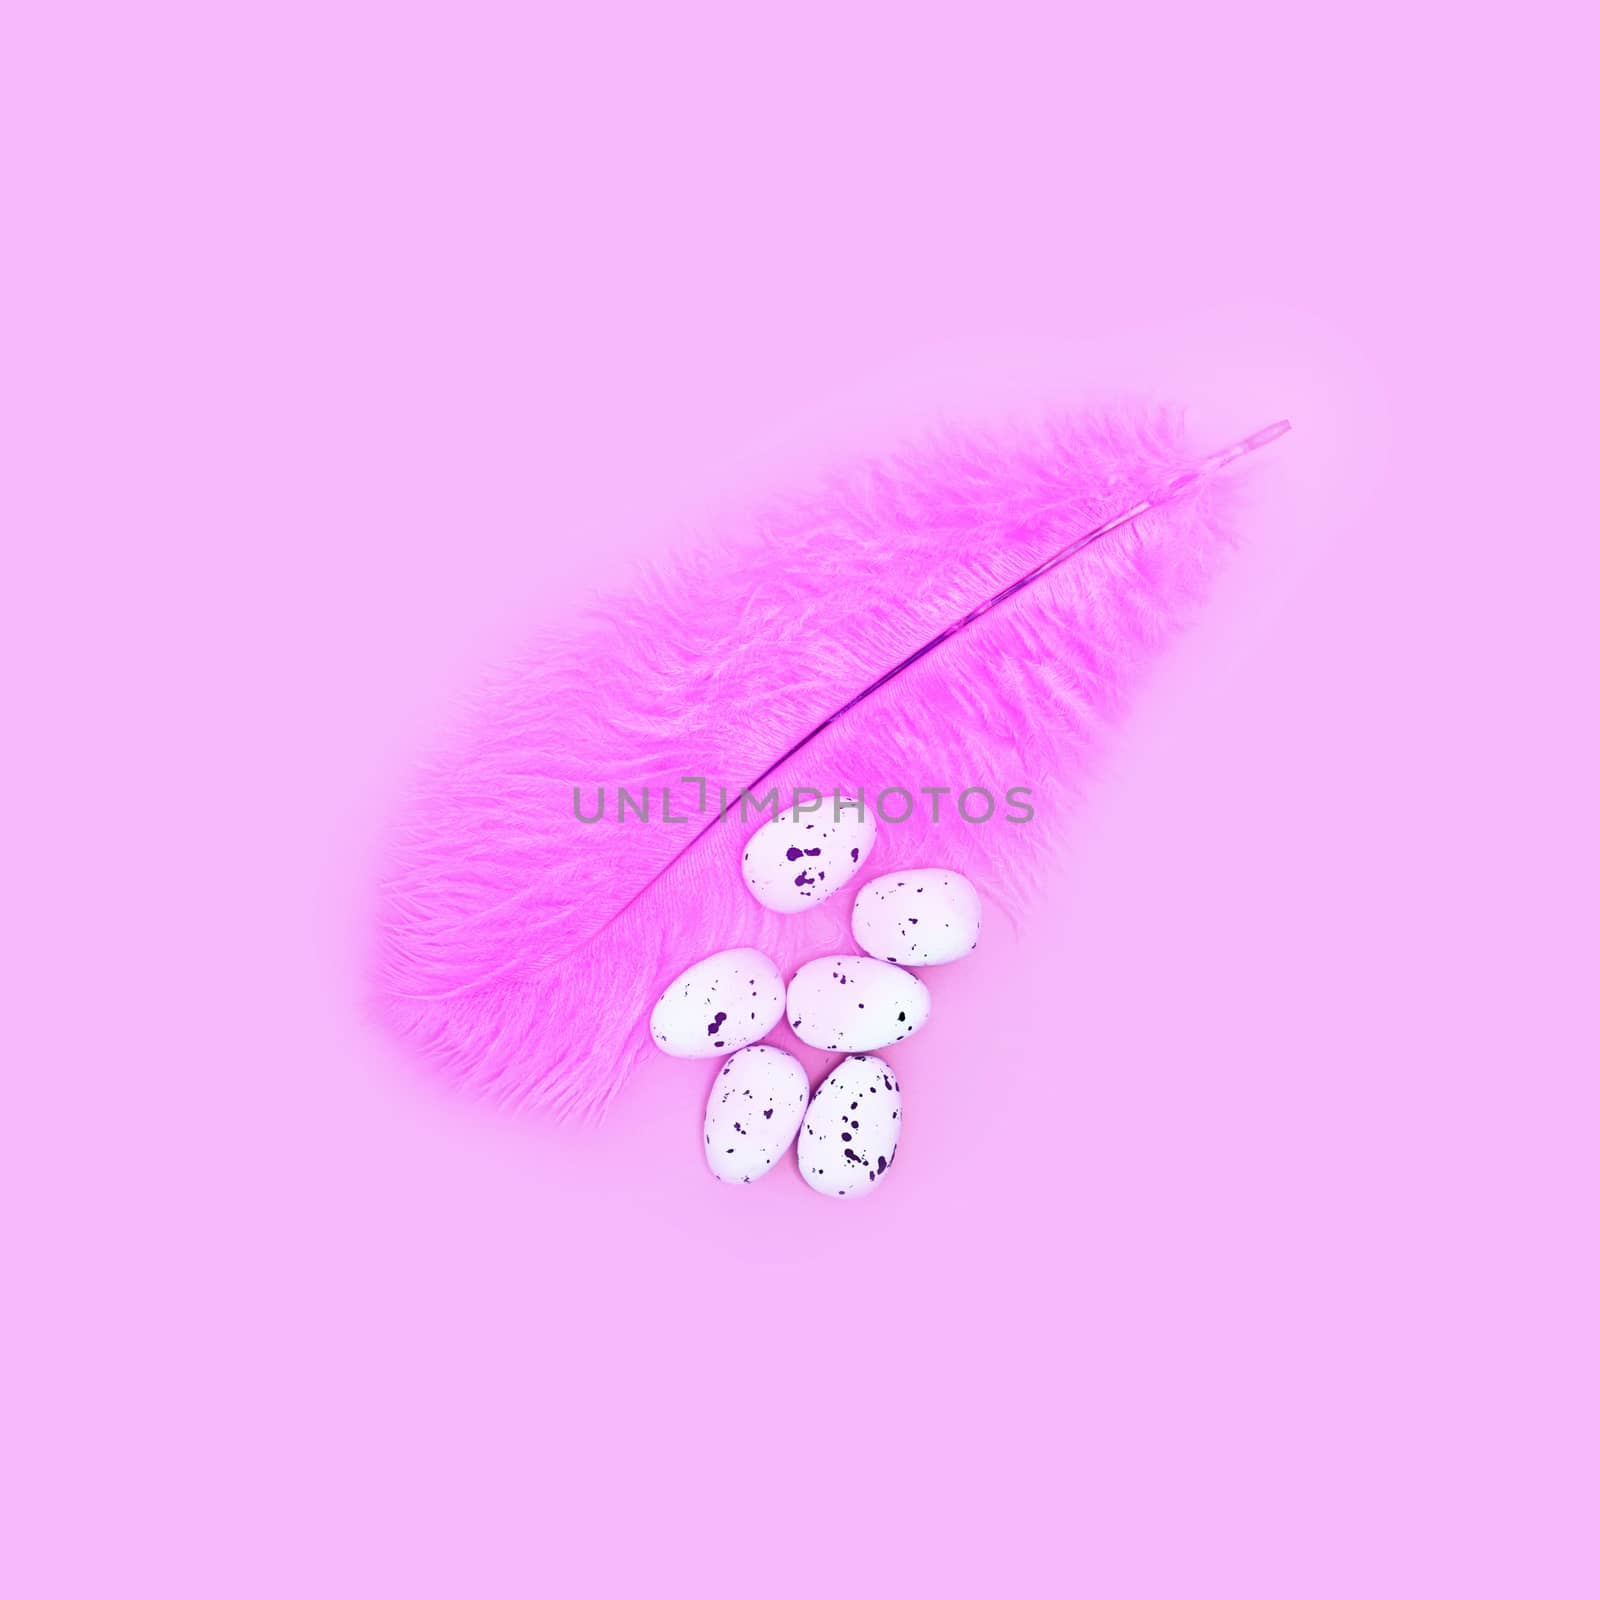 Eggs on a pink feather on a pink background. Easter concept